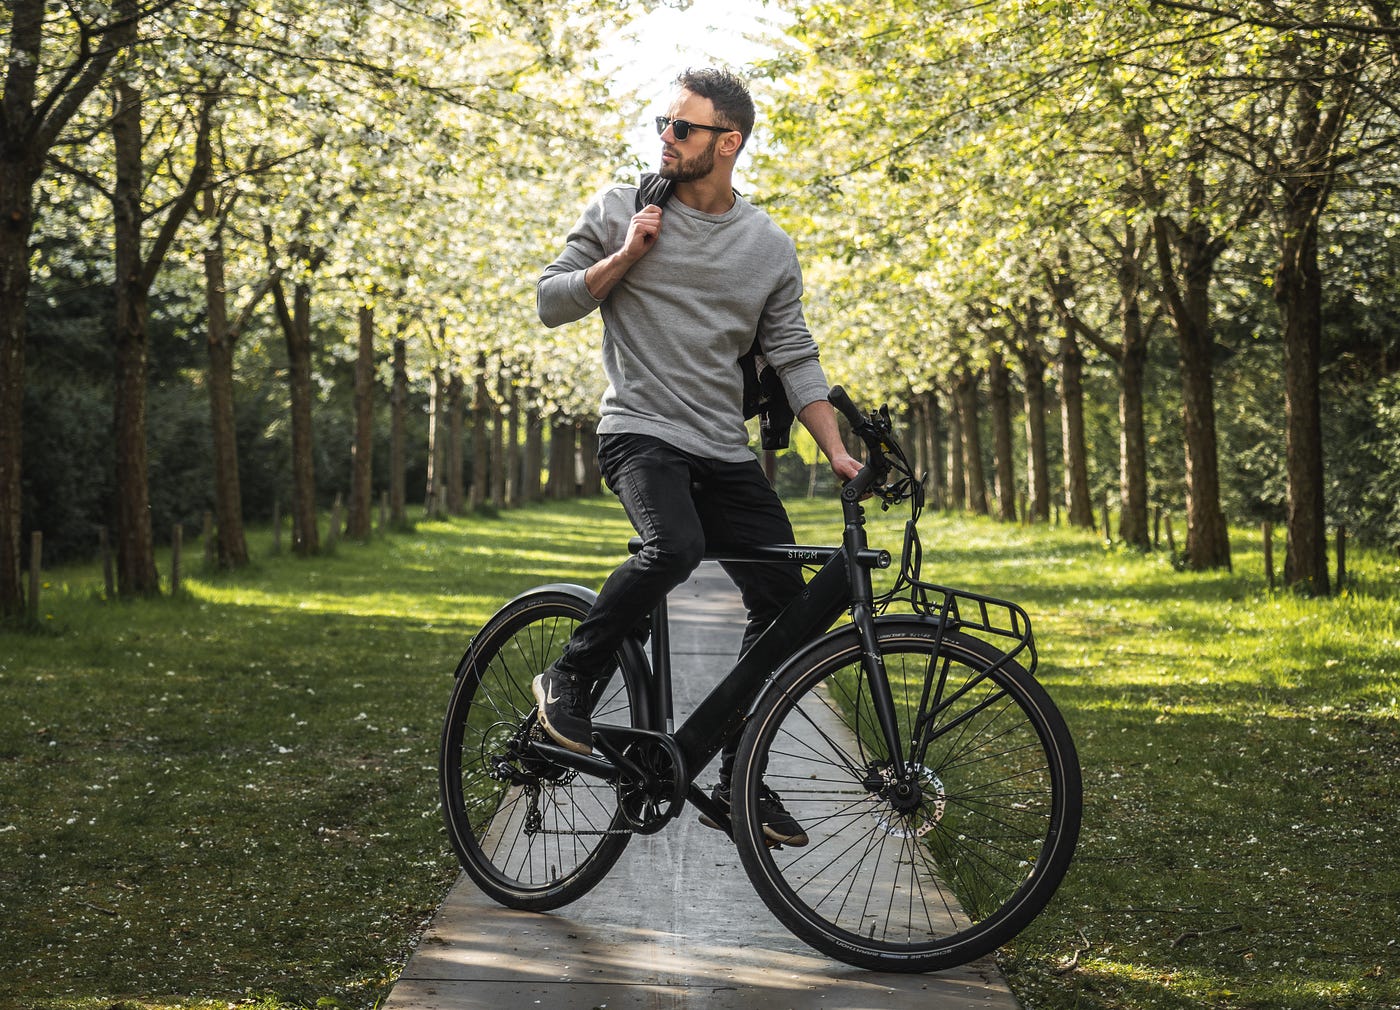 This Danish E-Bike Startup Is Leading The Transition To A Green Society |  by Giorgia Lombardo | DeMagSign | Medium